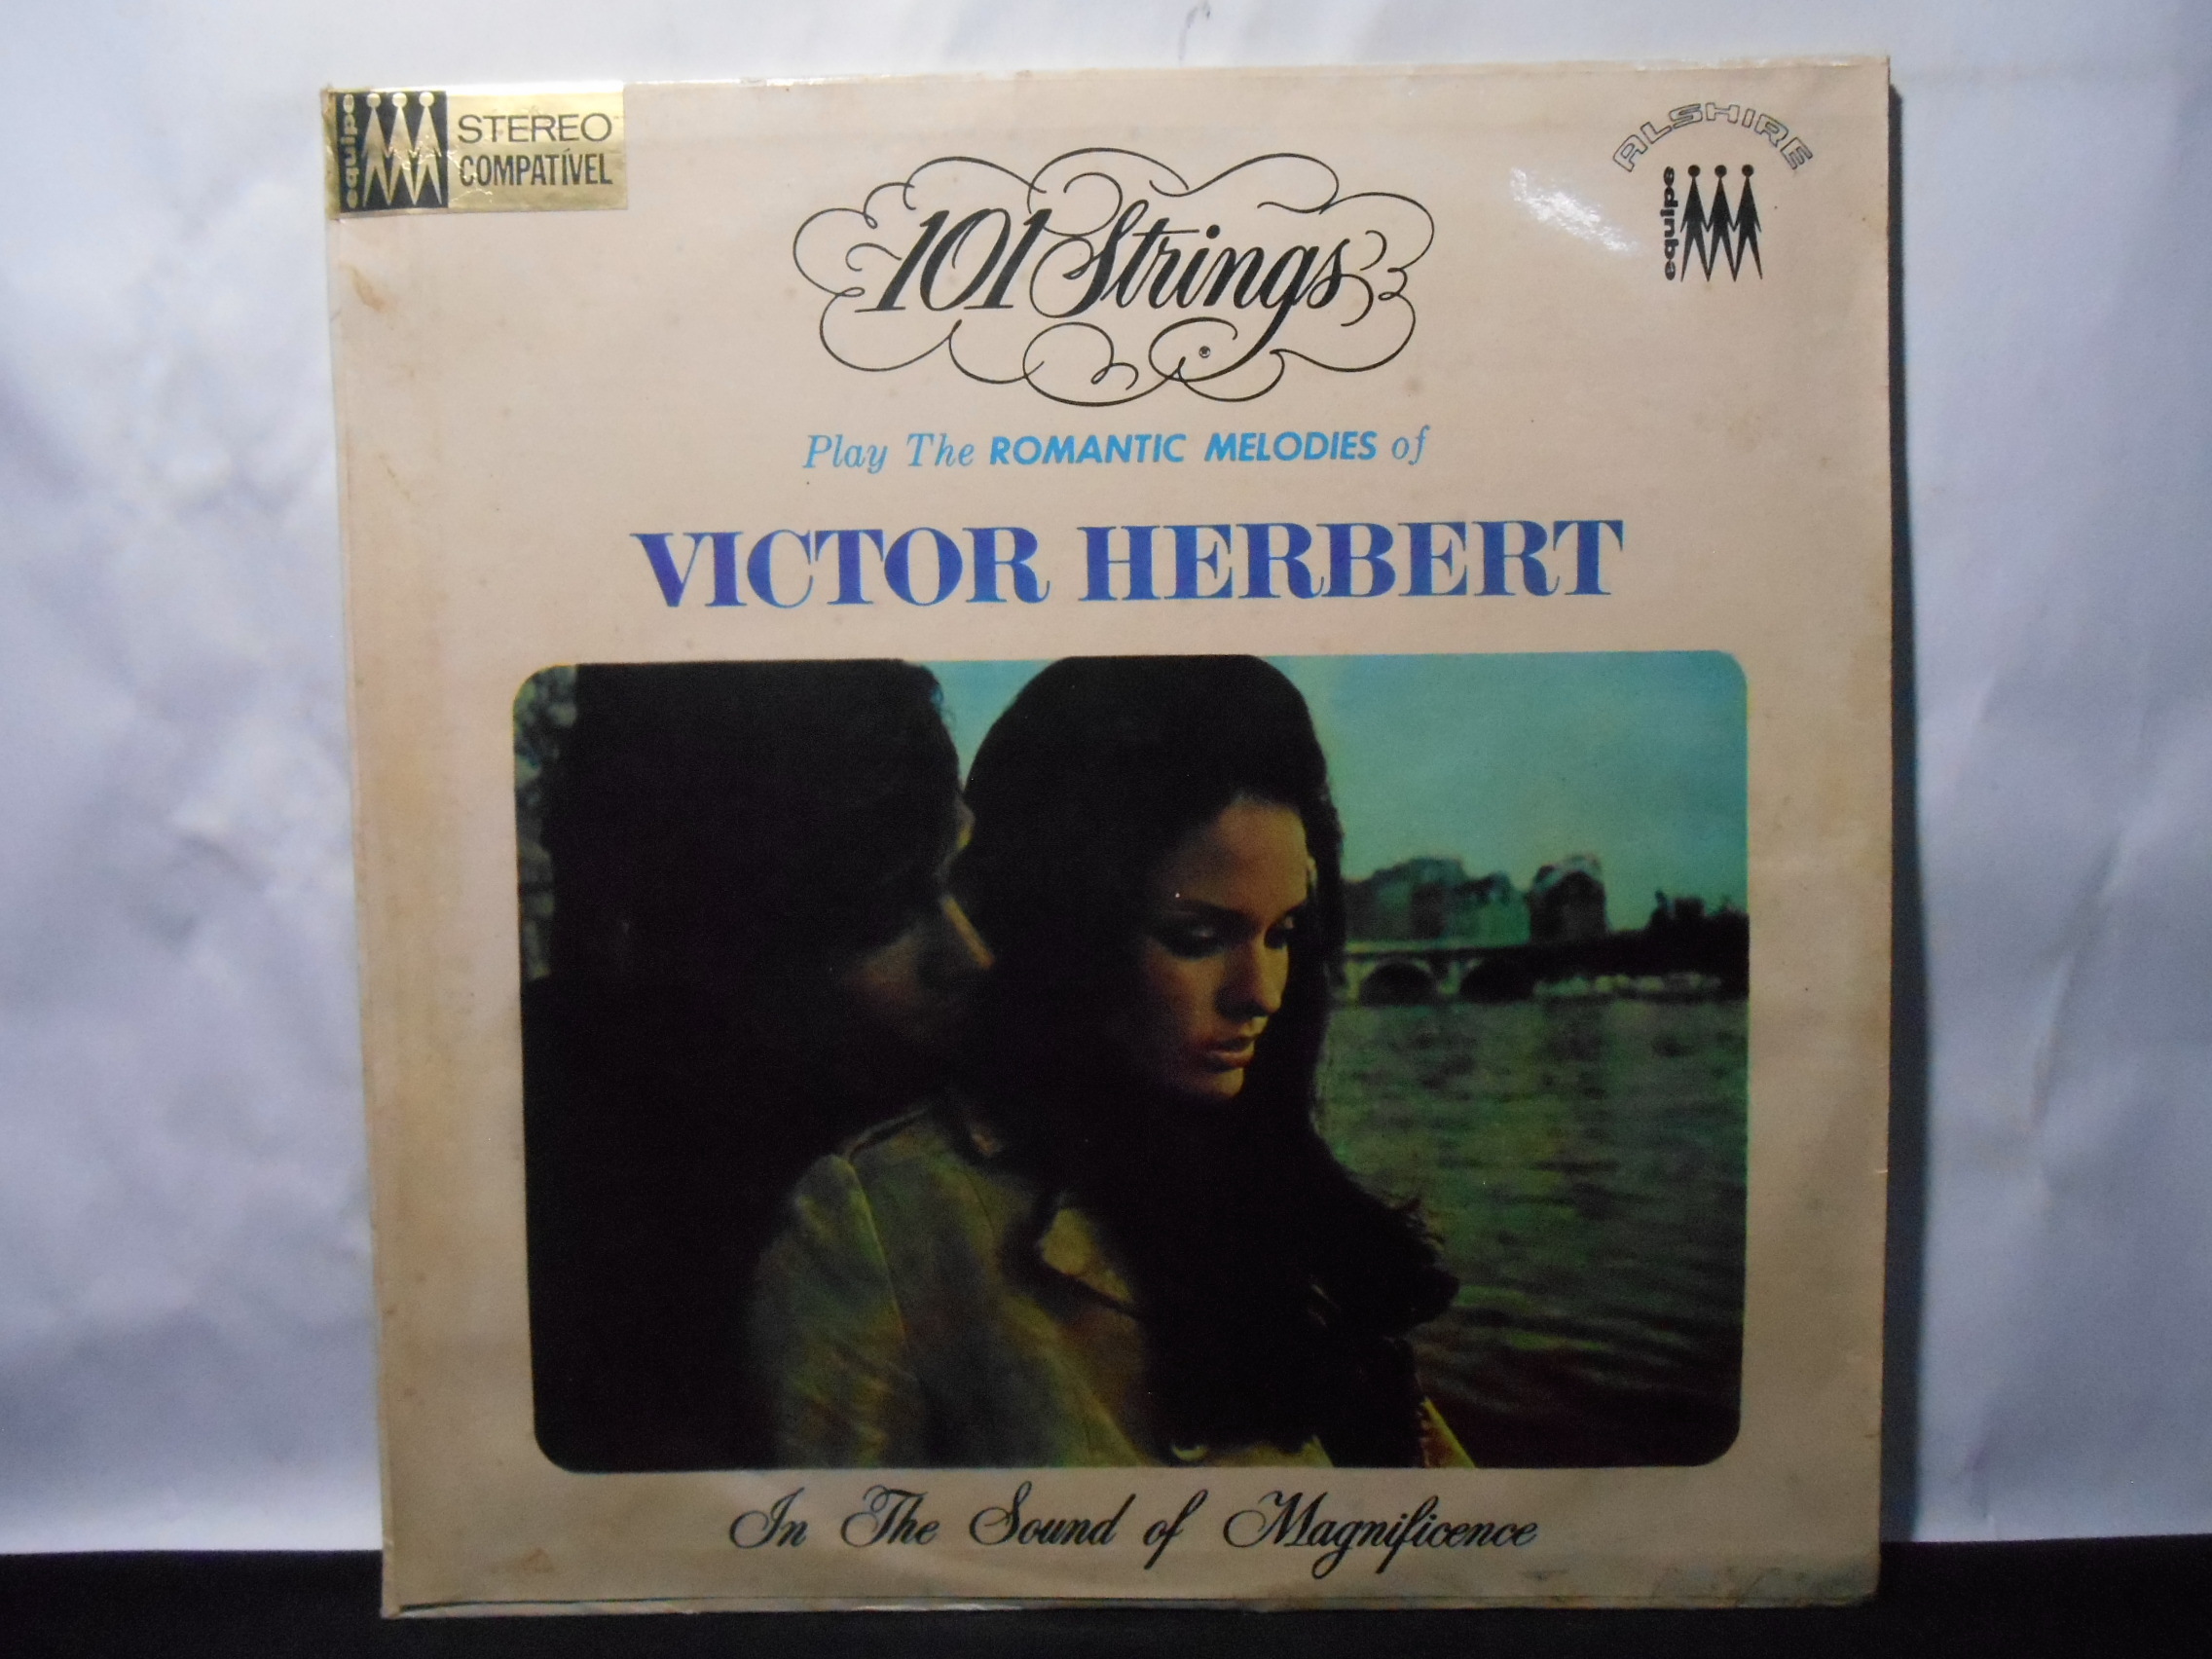 Vinil - 101 Strings - Play the Romantic Melodies of Victor Herbert in the Sound of Magnificence